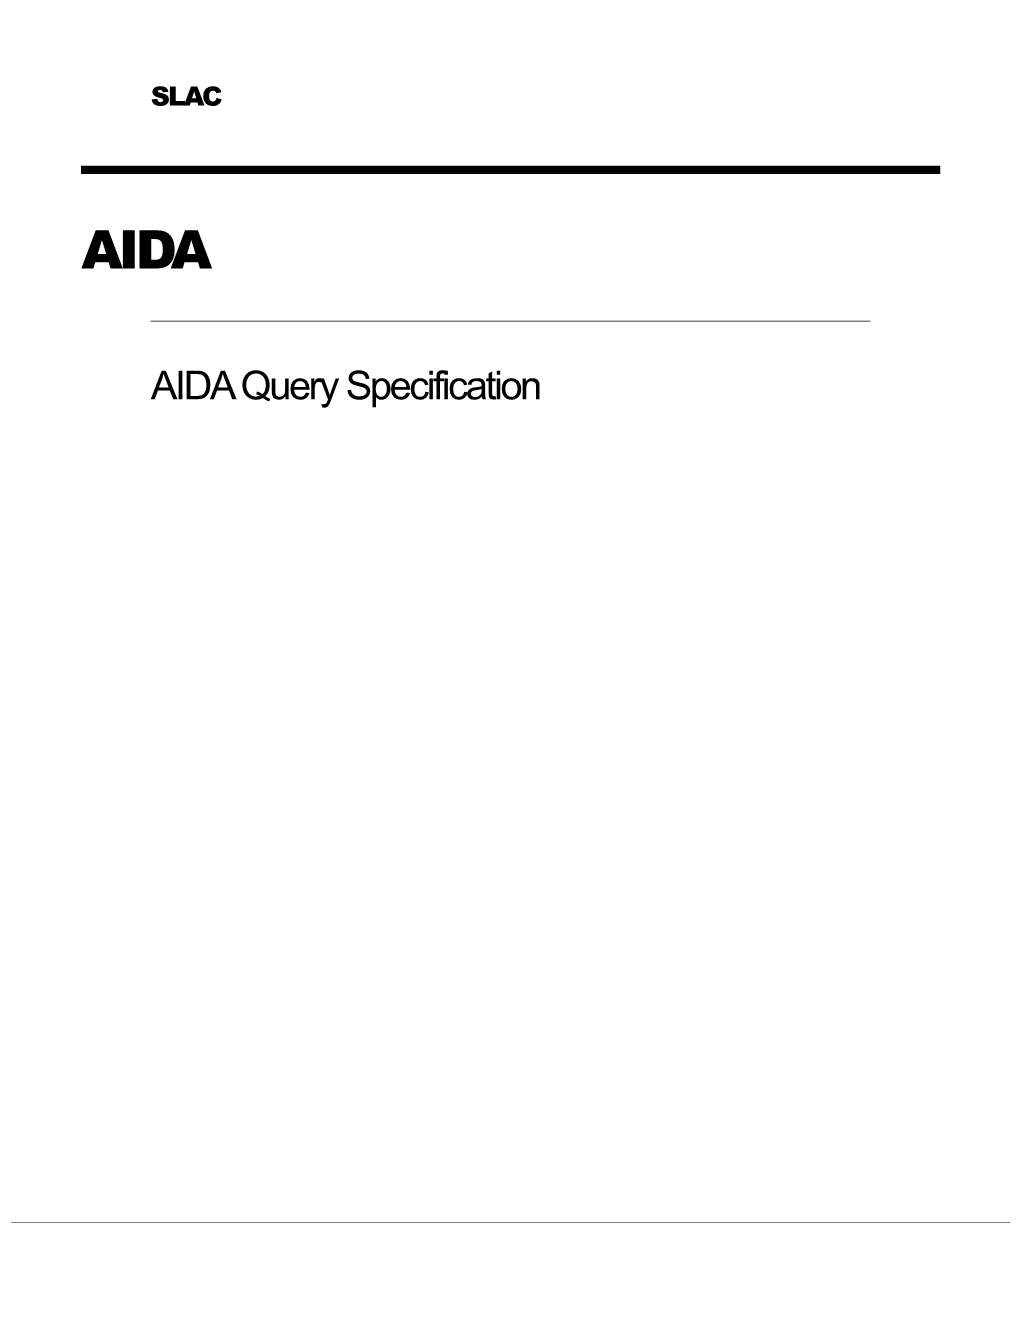 1. AIDA Query Specification - AQS 1